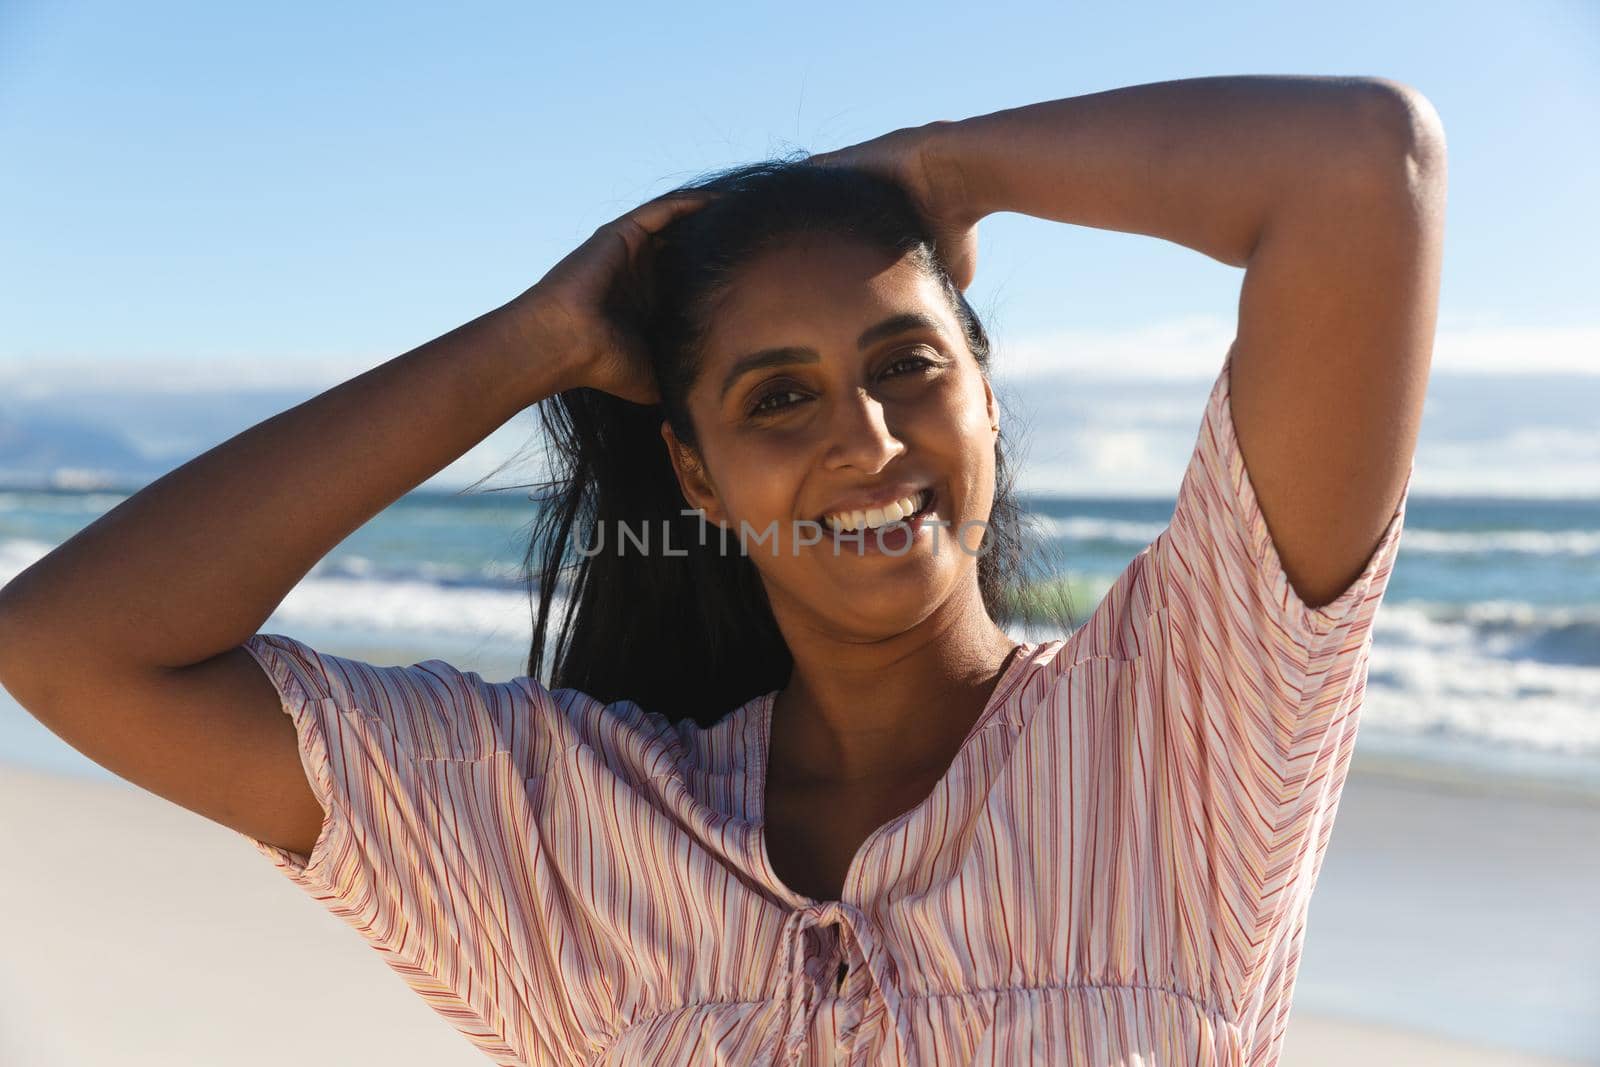 Portrait of smiling mixed race woman on beach holiday looking to camera. outdoor leisure vacation time by the sea.